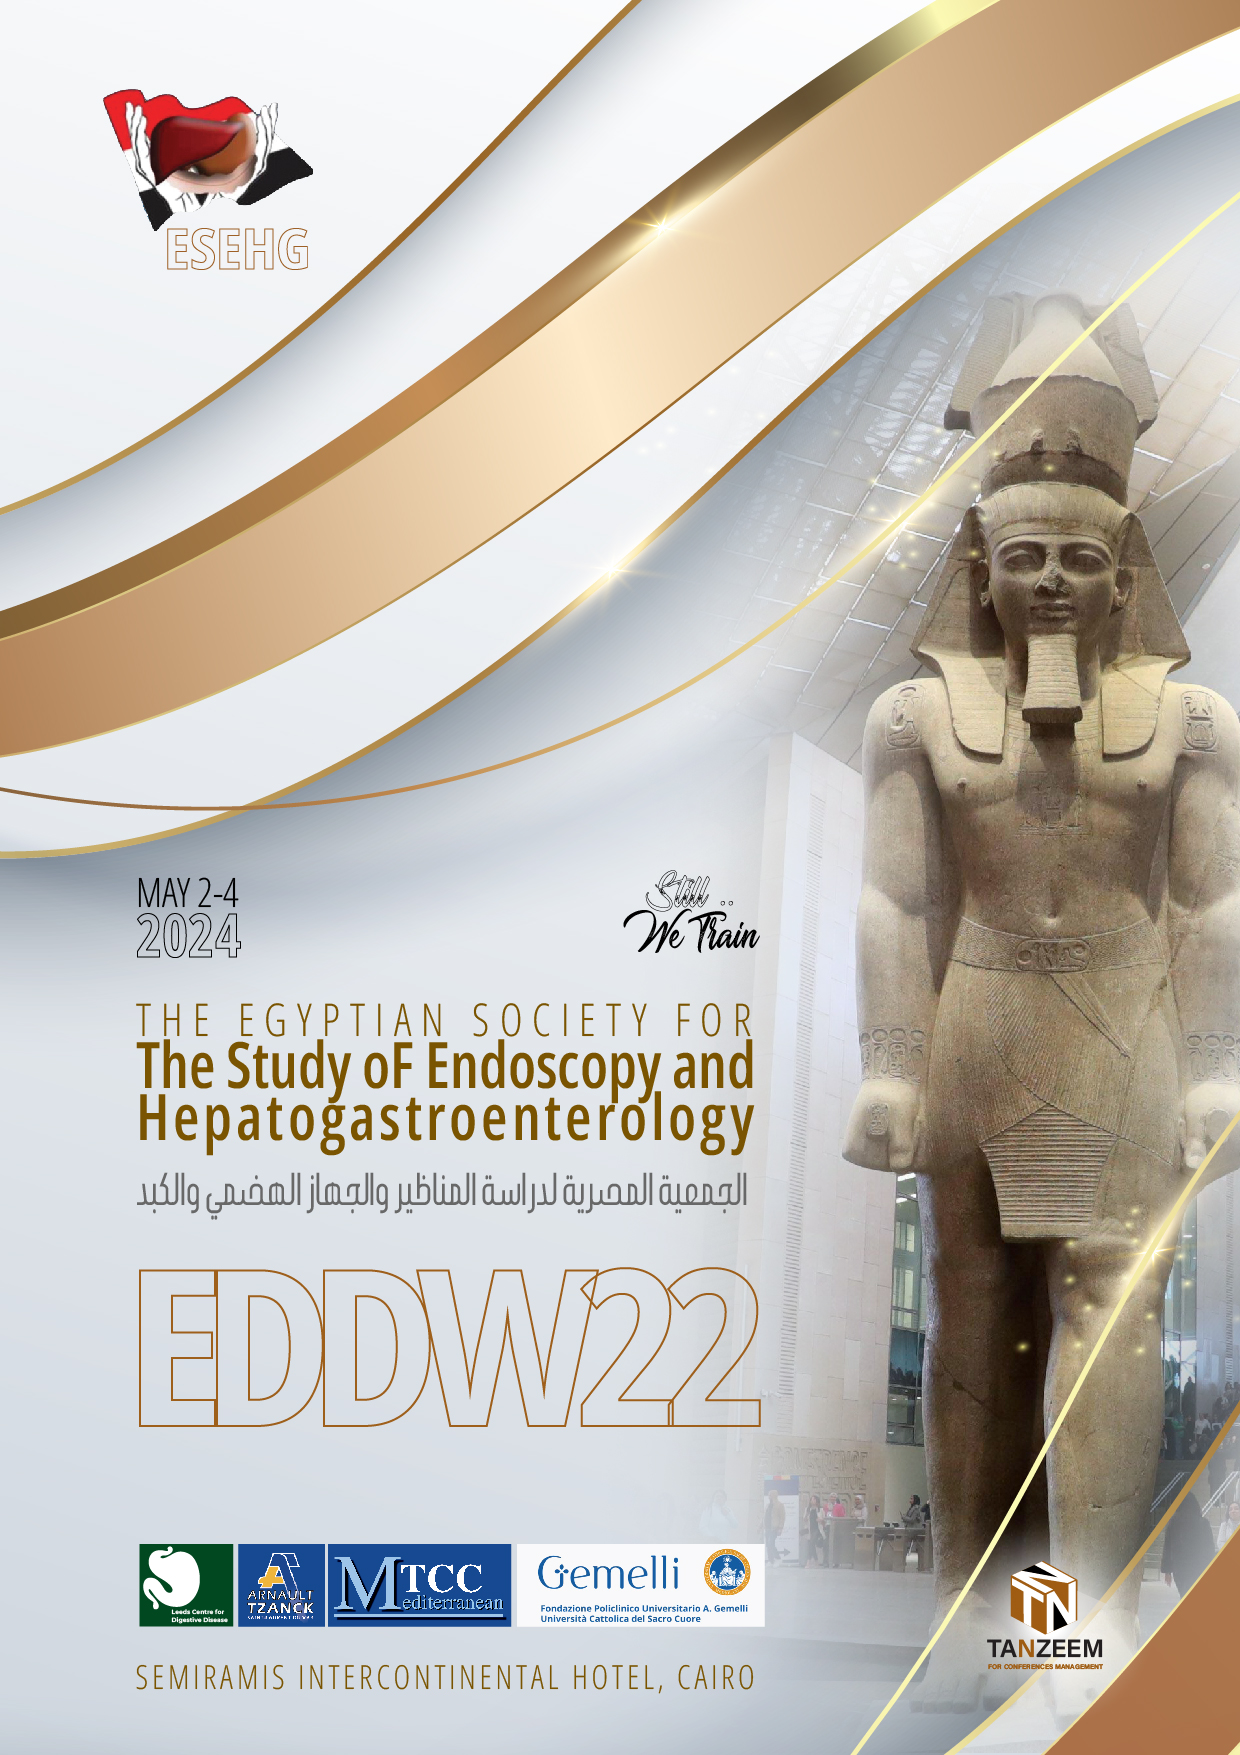 The Egyptian Society For The Study Of Endoscopy And Hepatogastroenterology